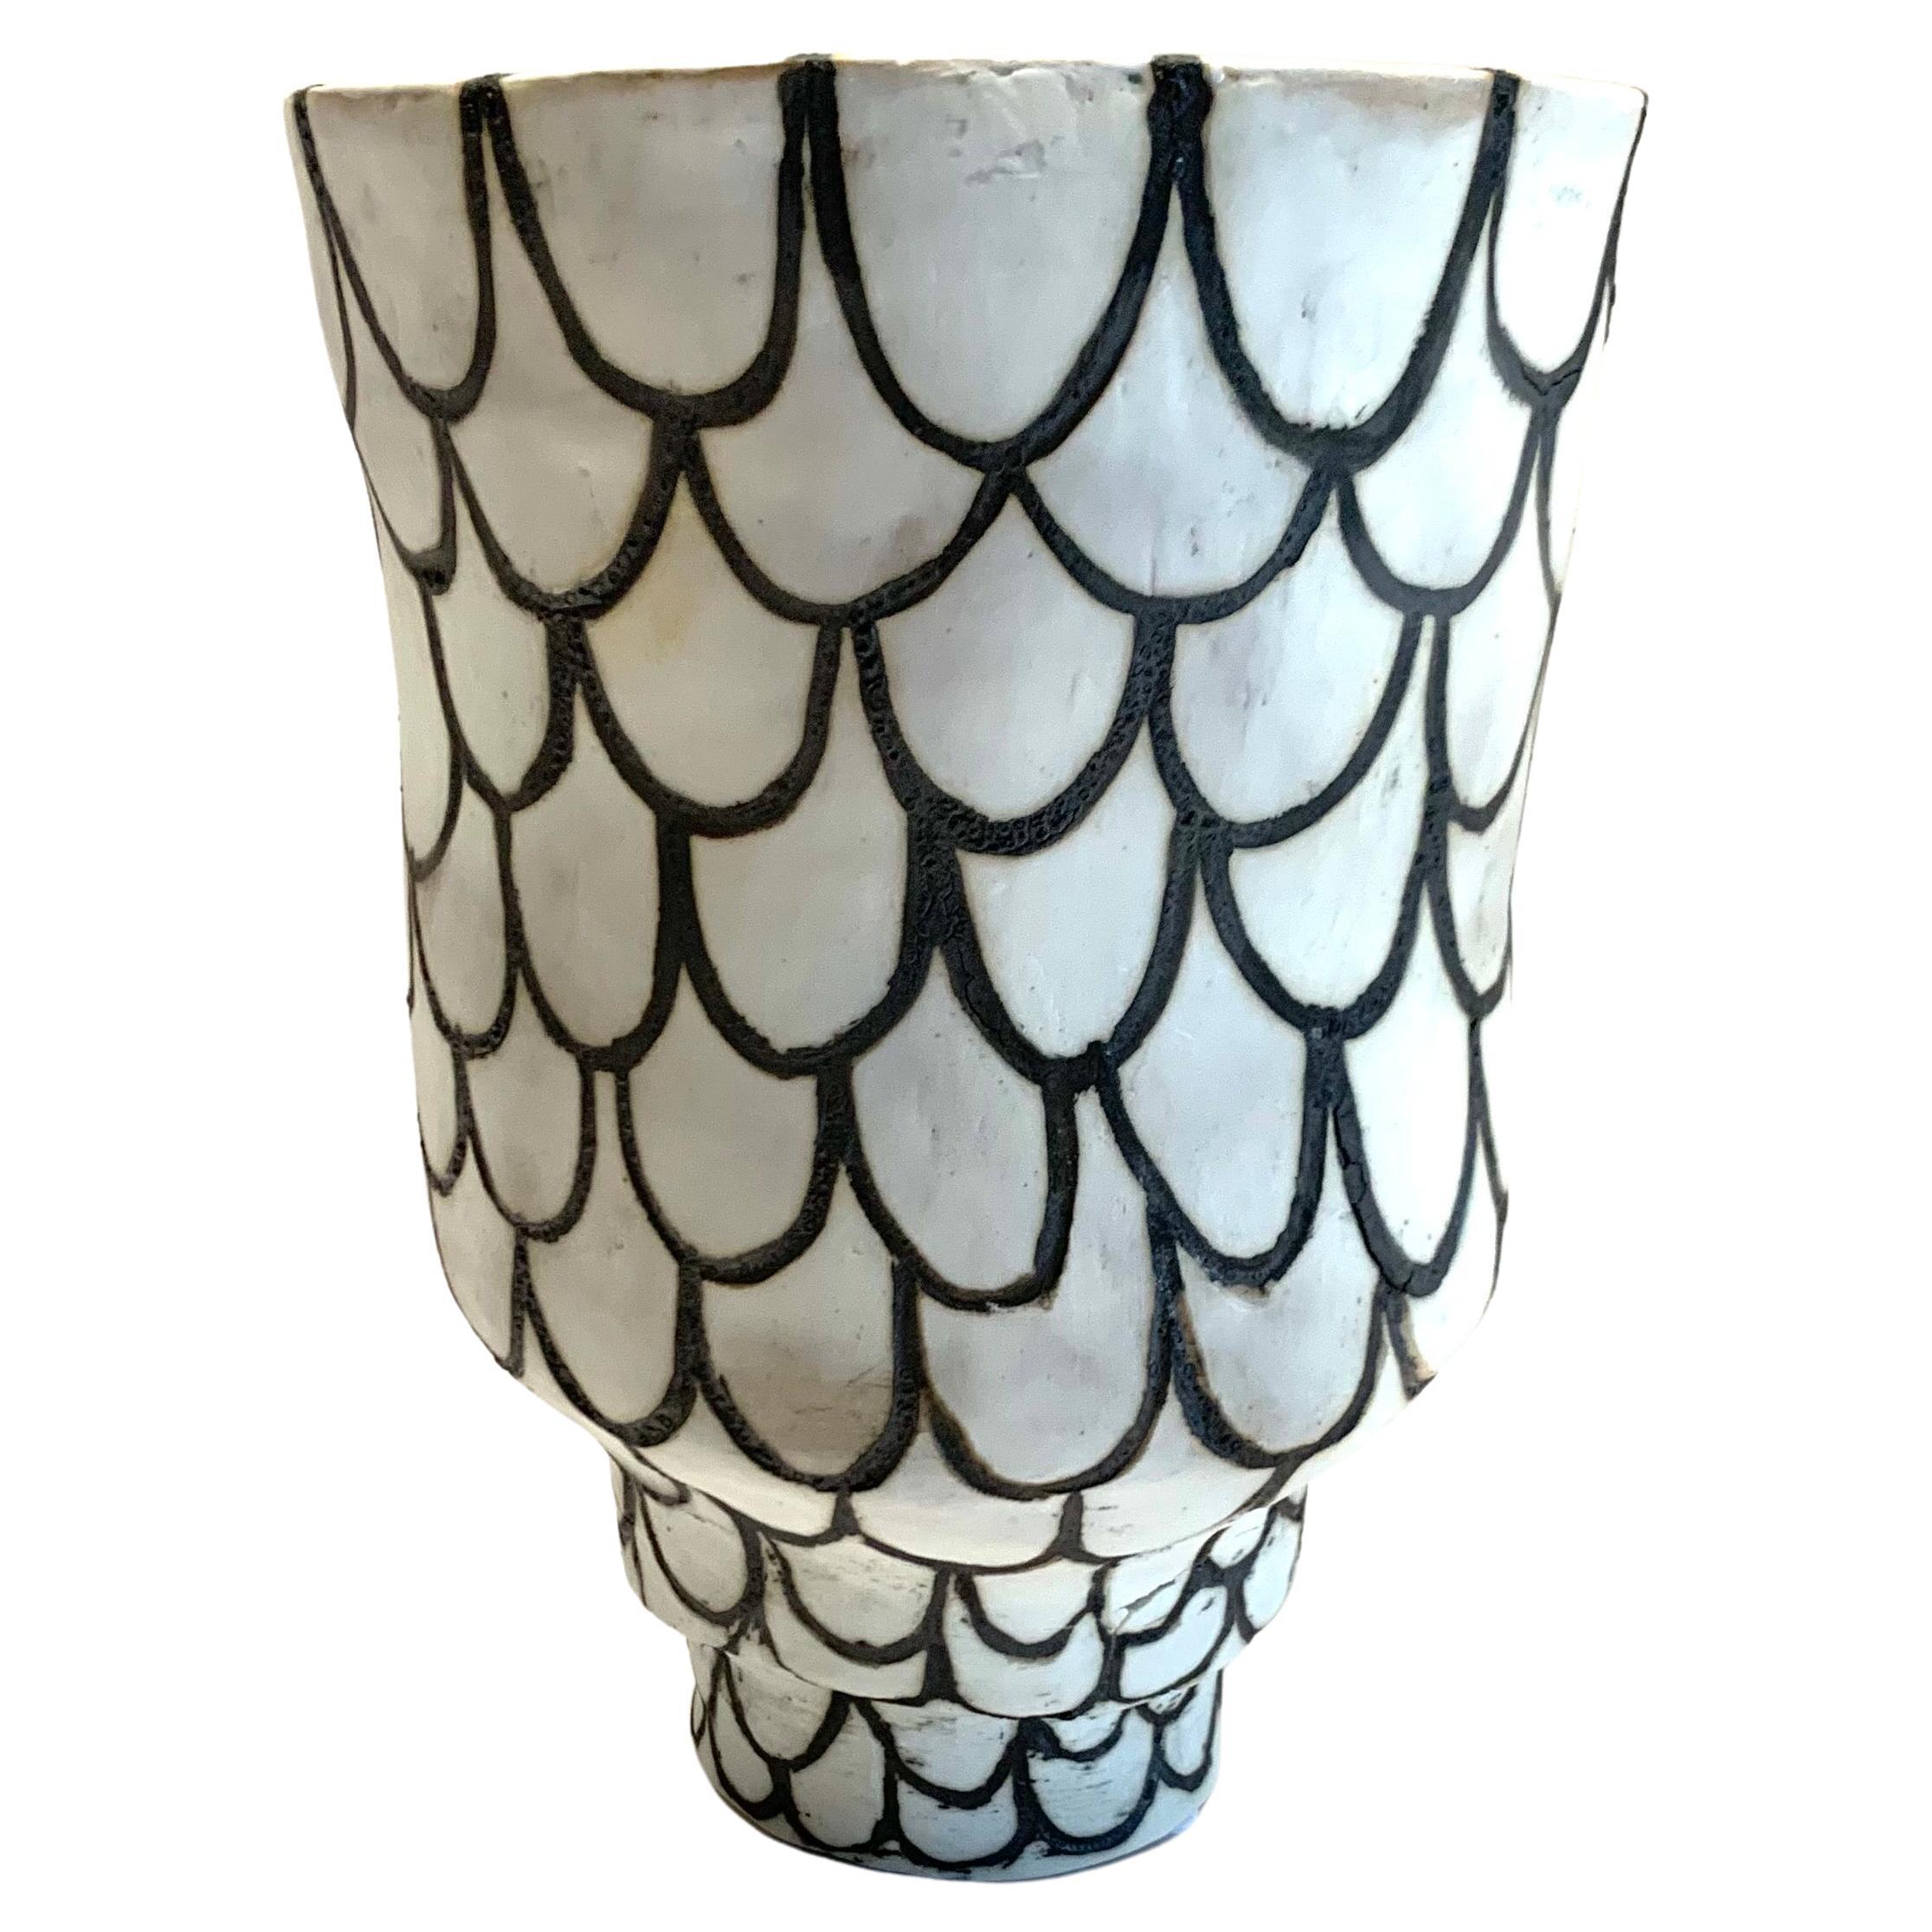 Contemporary American ceramicist Brenda Holzke hand made unique one of a kind stoneware vase that made of dark stoneware and porcelain slip.
Fish Scale design.